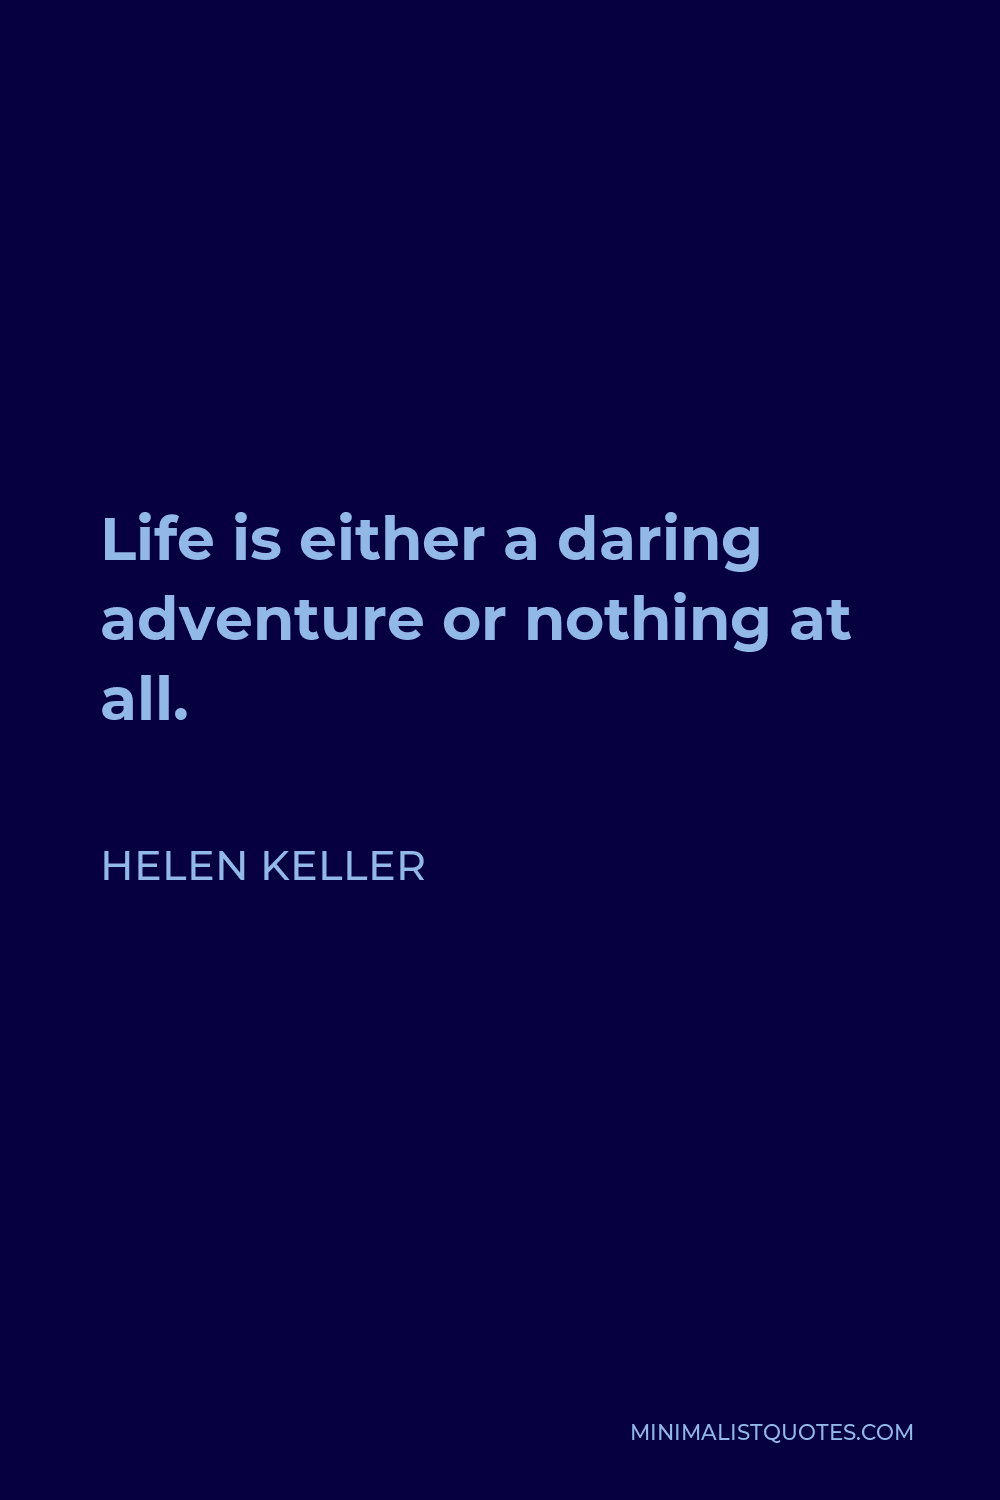 Helen Keller Quote - Life is either a daring adventure or nothing at all.